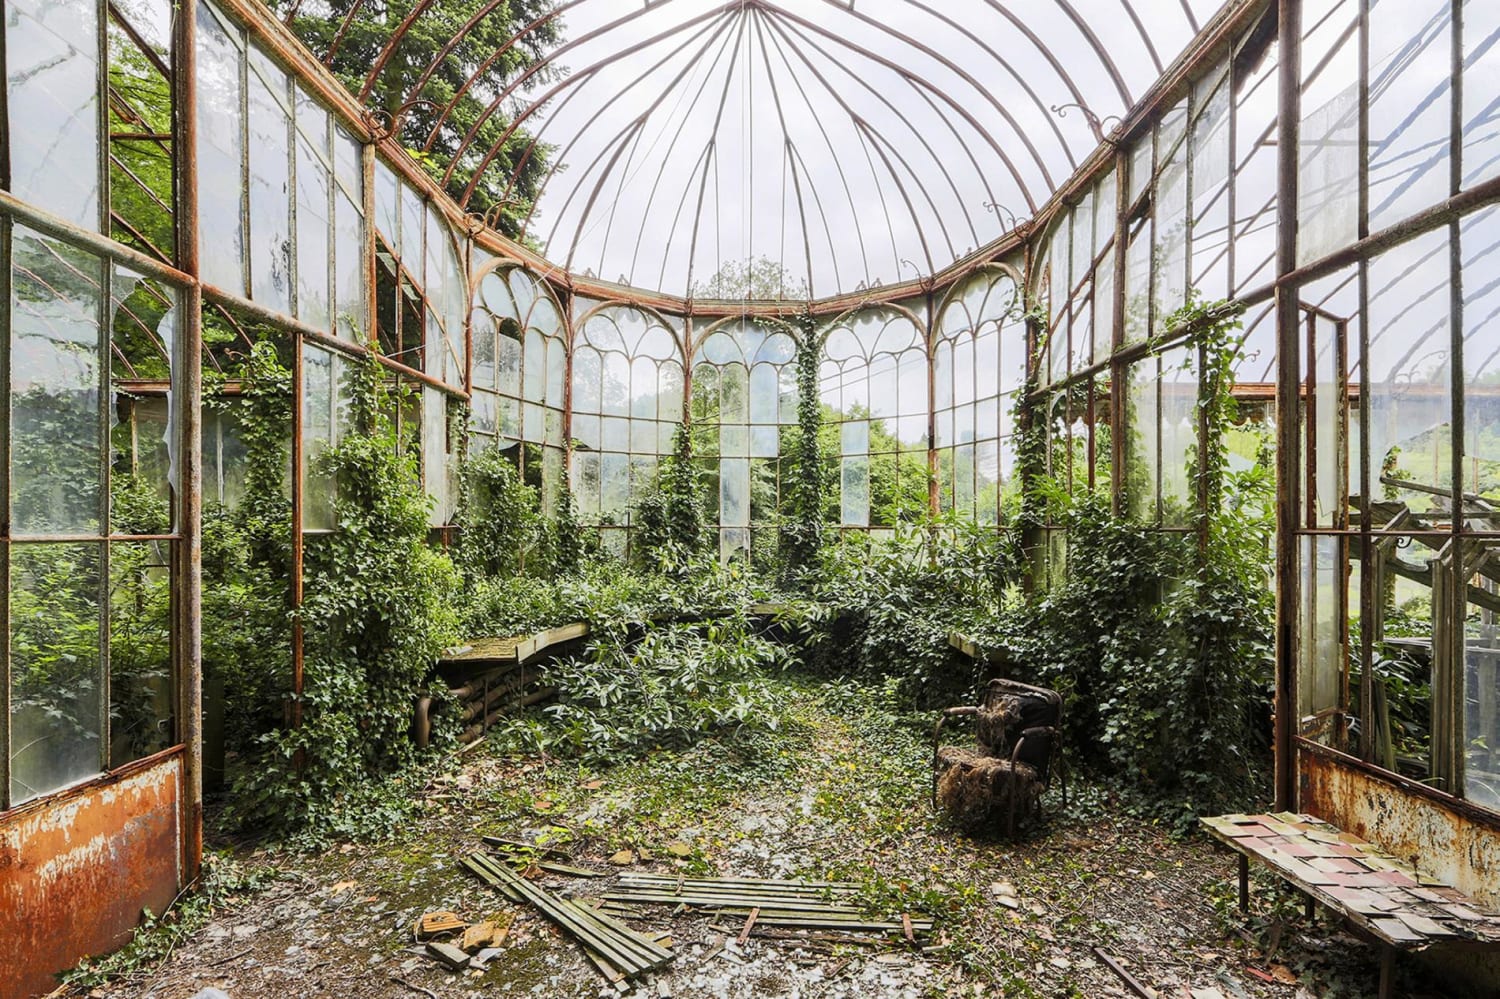 See nature reclaim these abandoned places